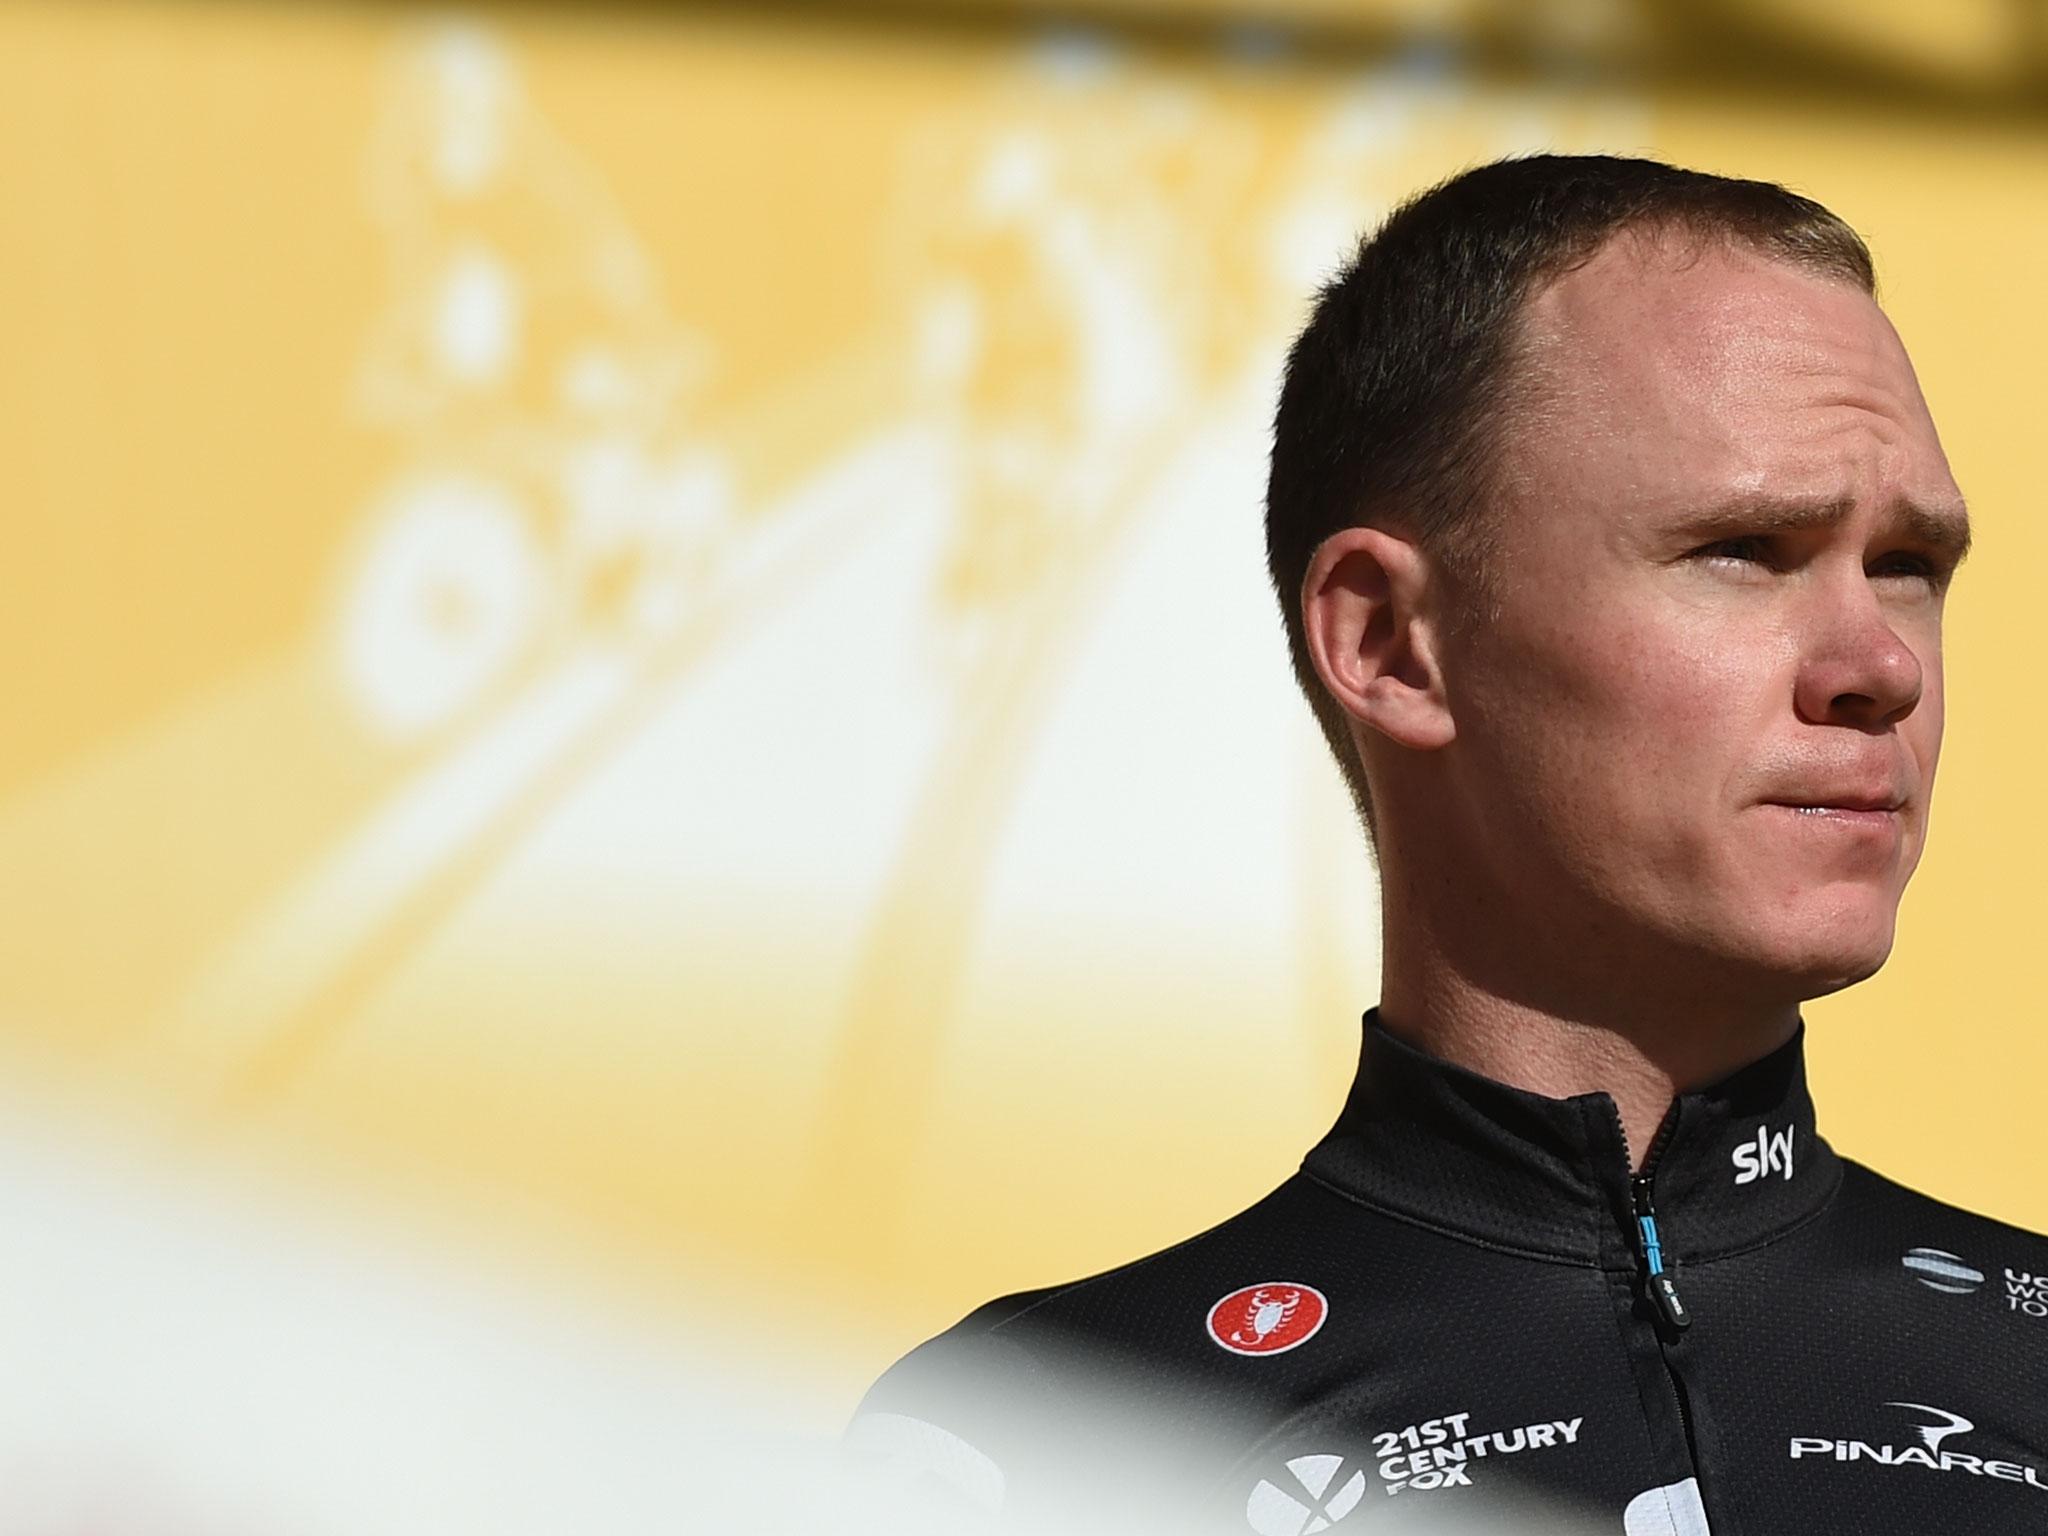 It is understood that Froome and his team are still examining the variables which may have caused the adverse result